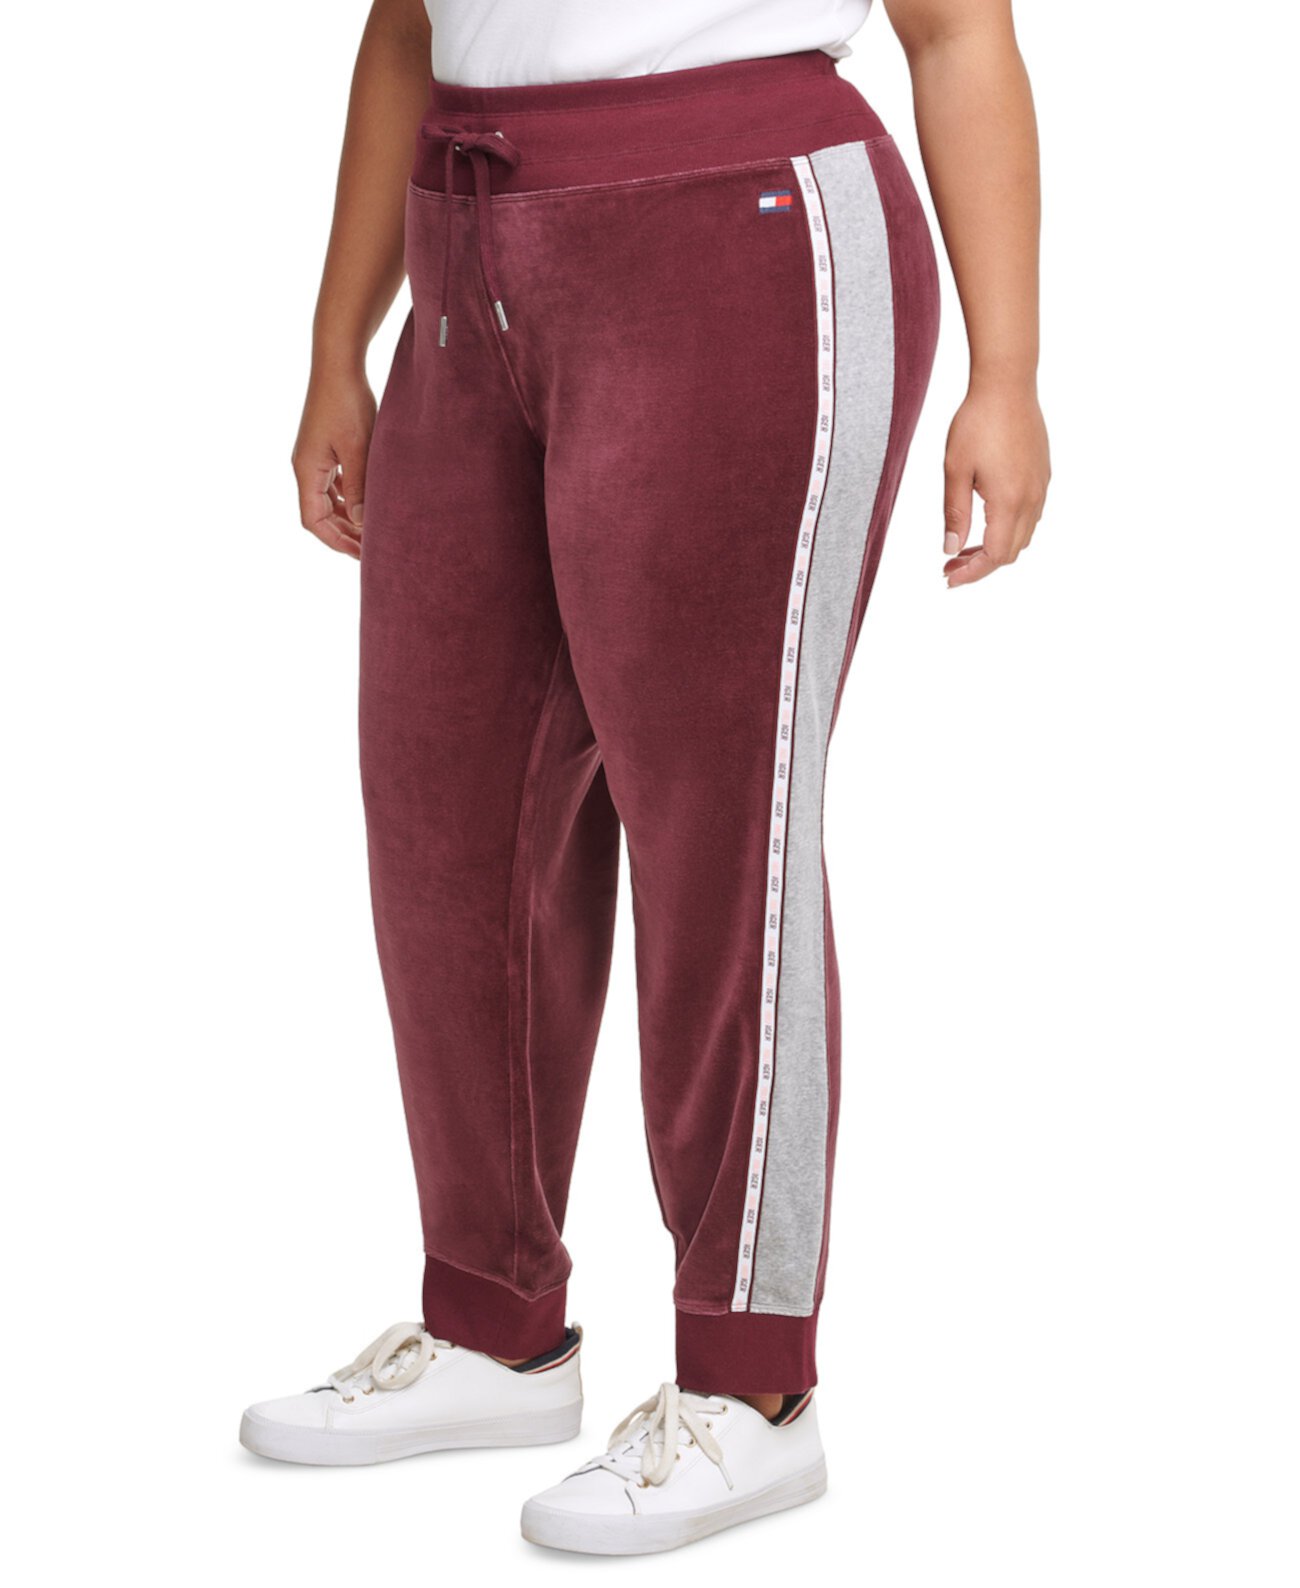 Plus Size Colorblocked Velour Jogger Pants With Micro-Tape Trim Tommy Hilfiger